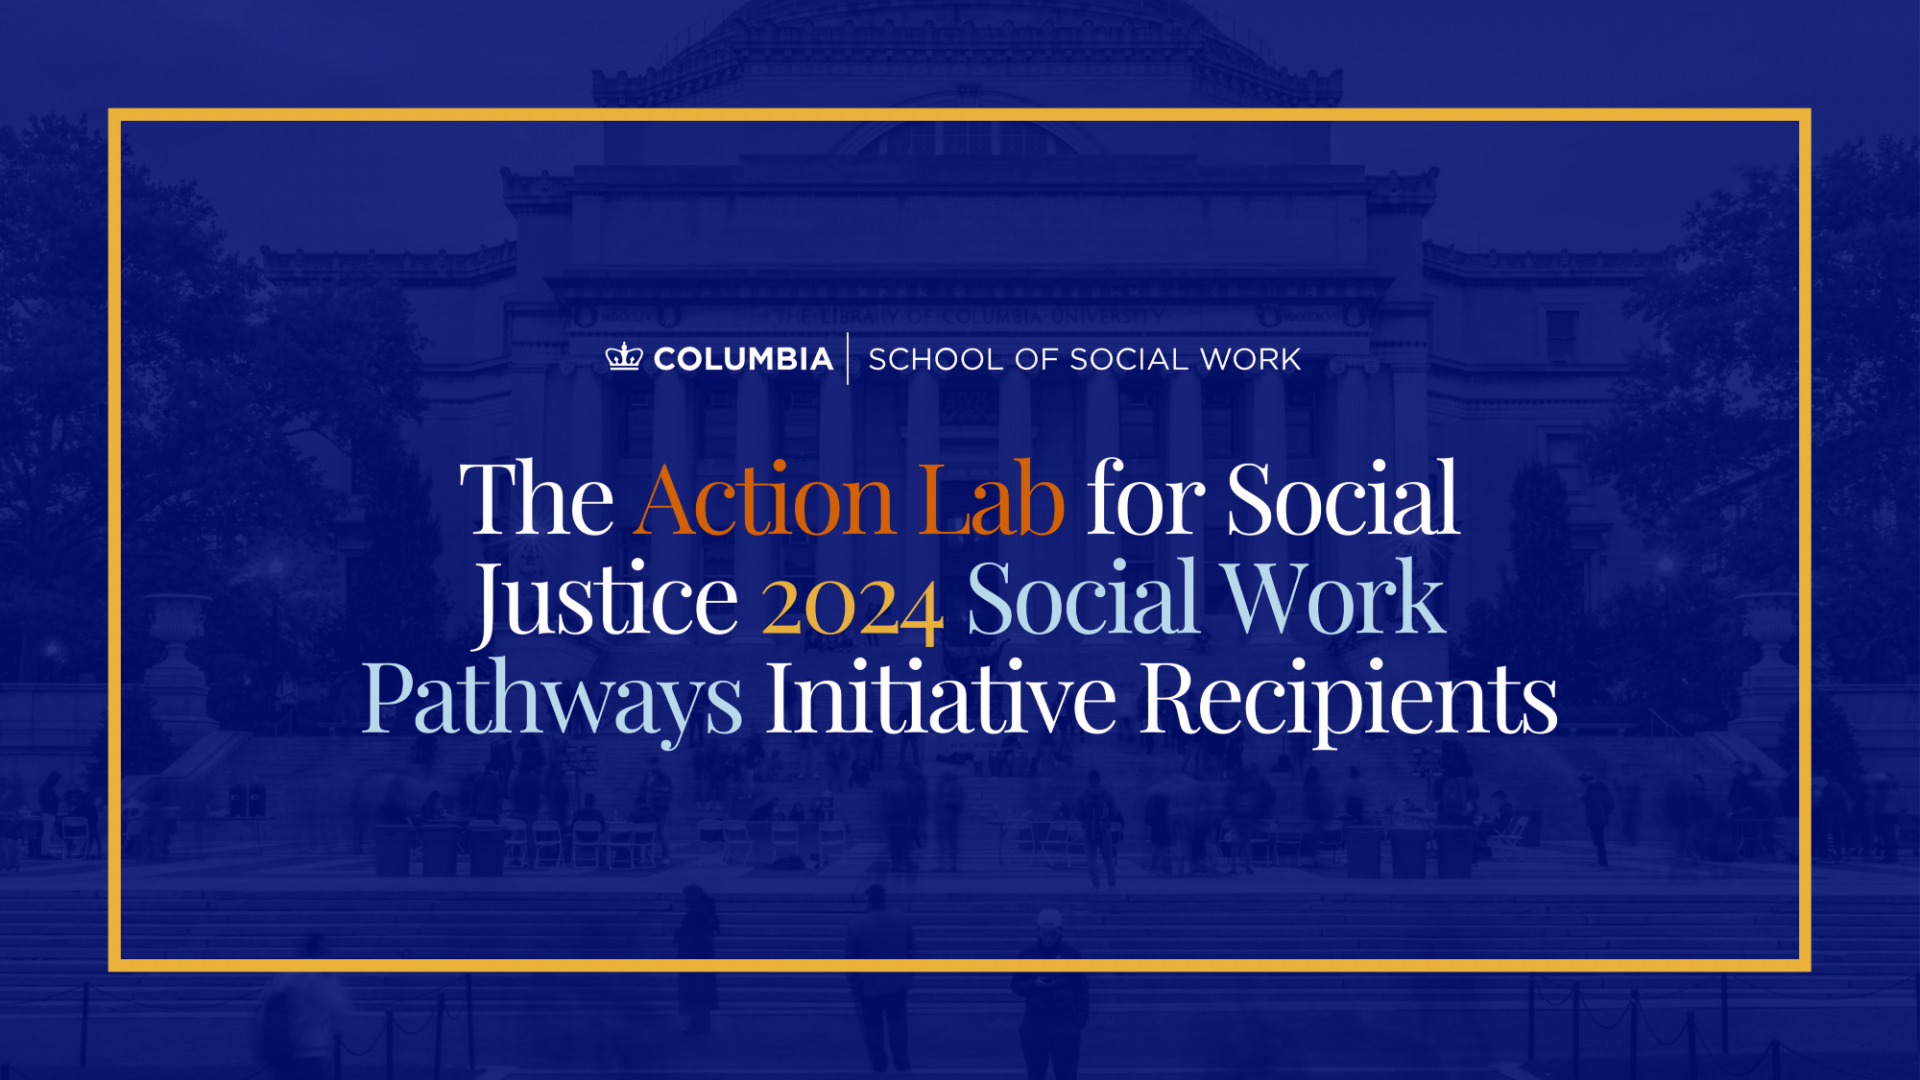 Action Lab for Social Justice 2024 Social Work Pathways Initiative Recipients